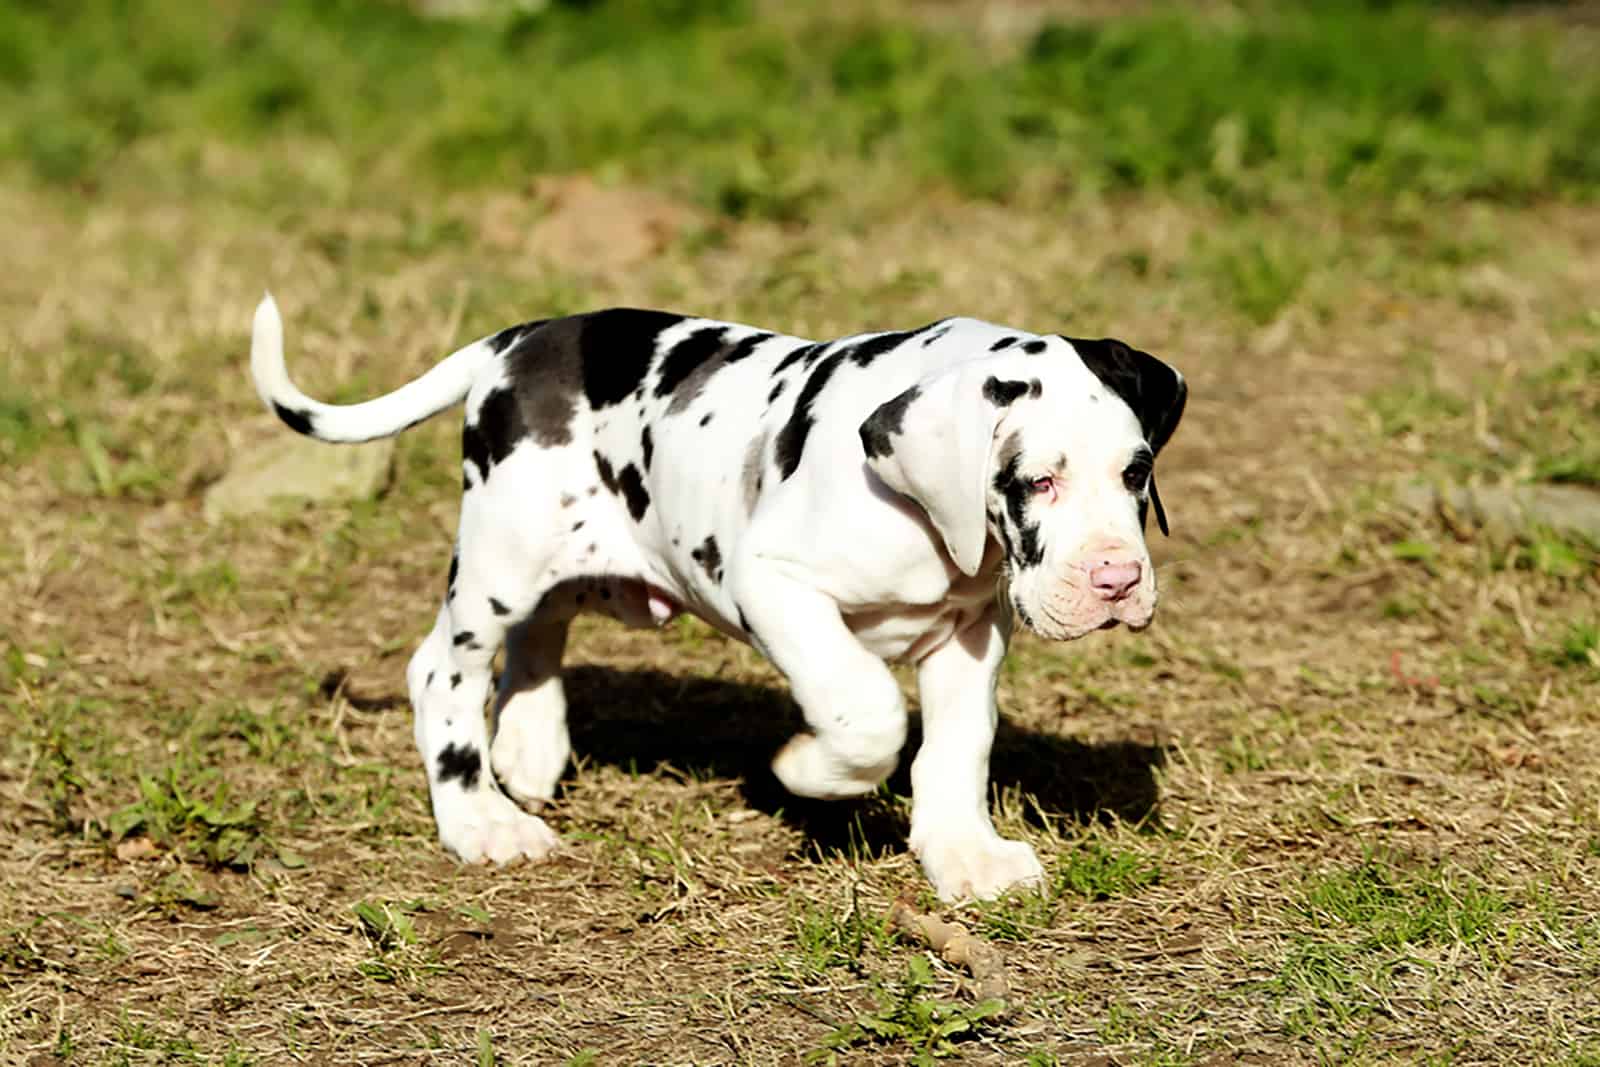 harequin great dane puppy dog walking outdoors